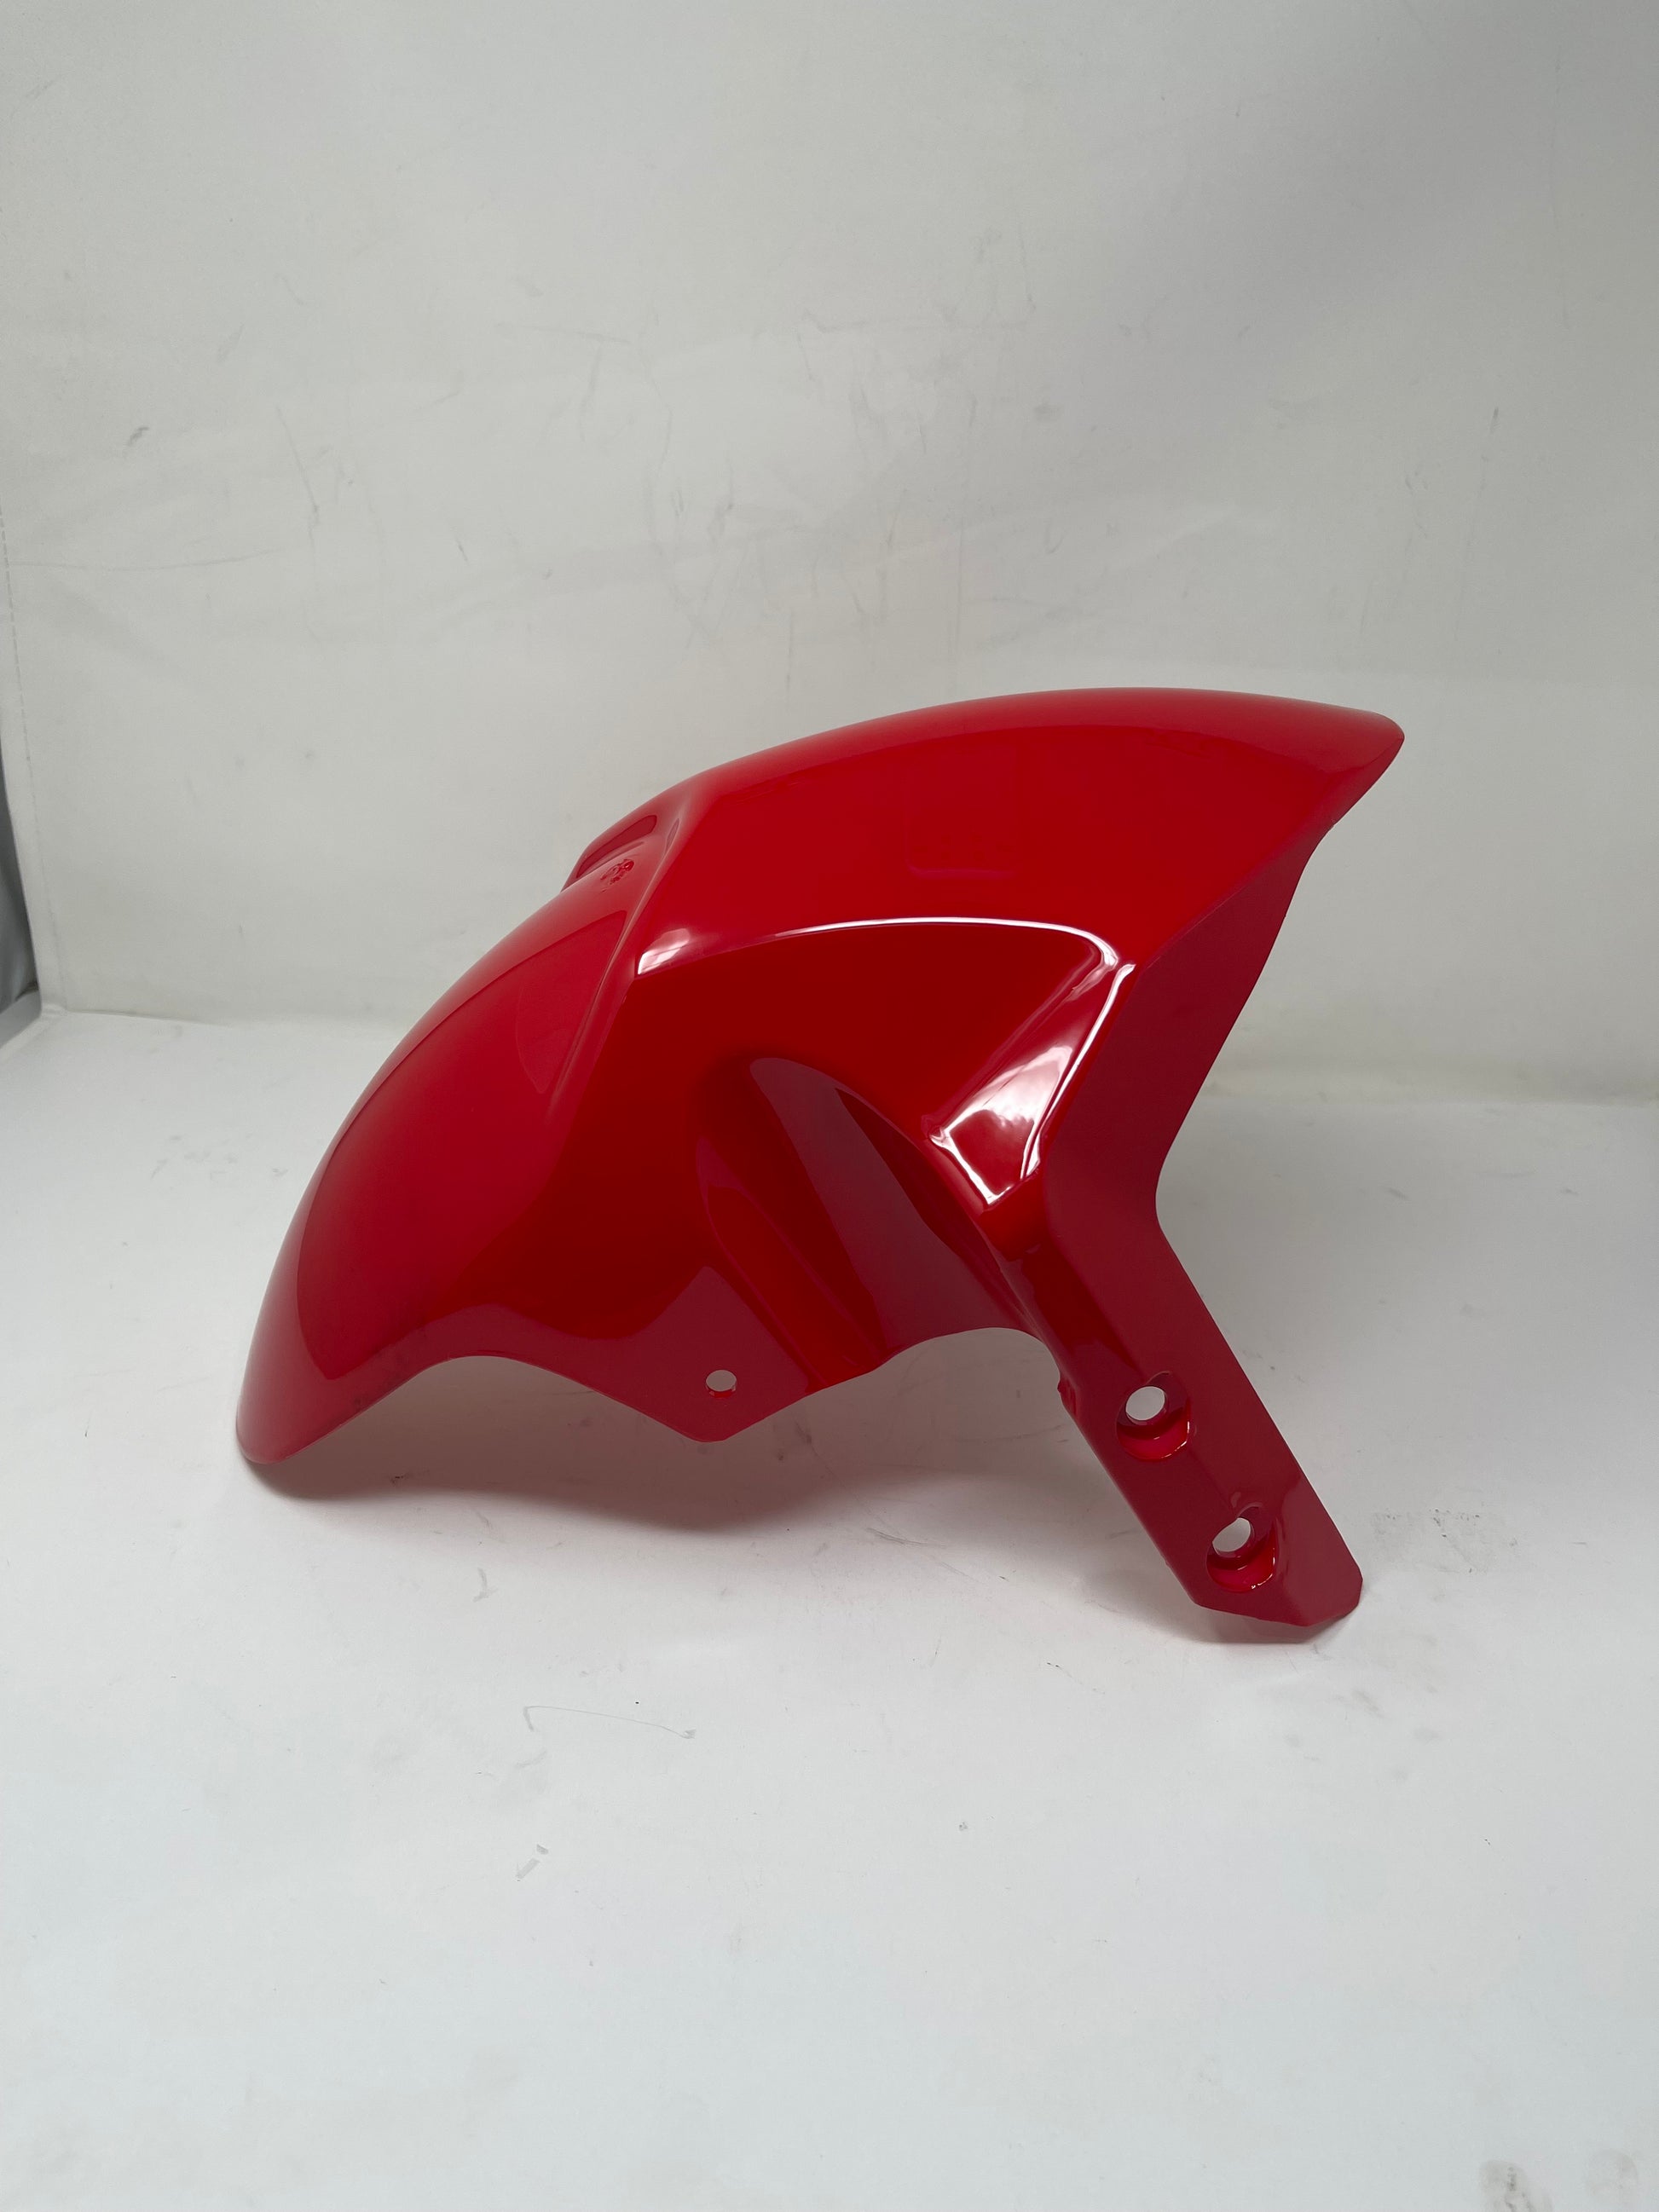 Front tire fender for Venom X20 for sale. 125010007 red